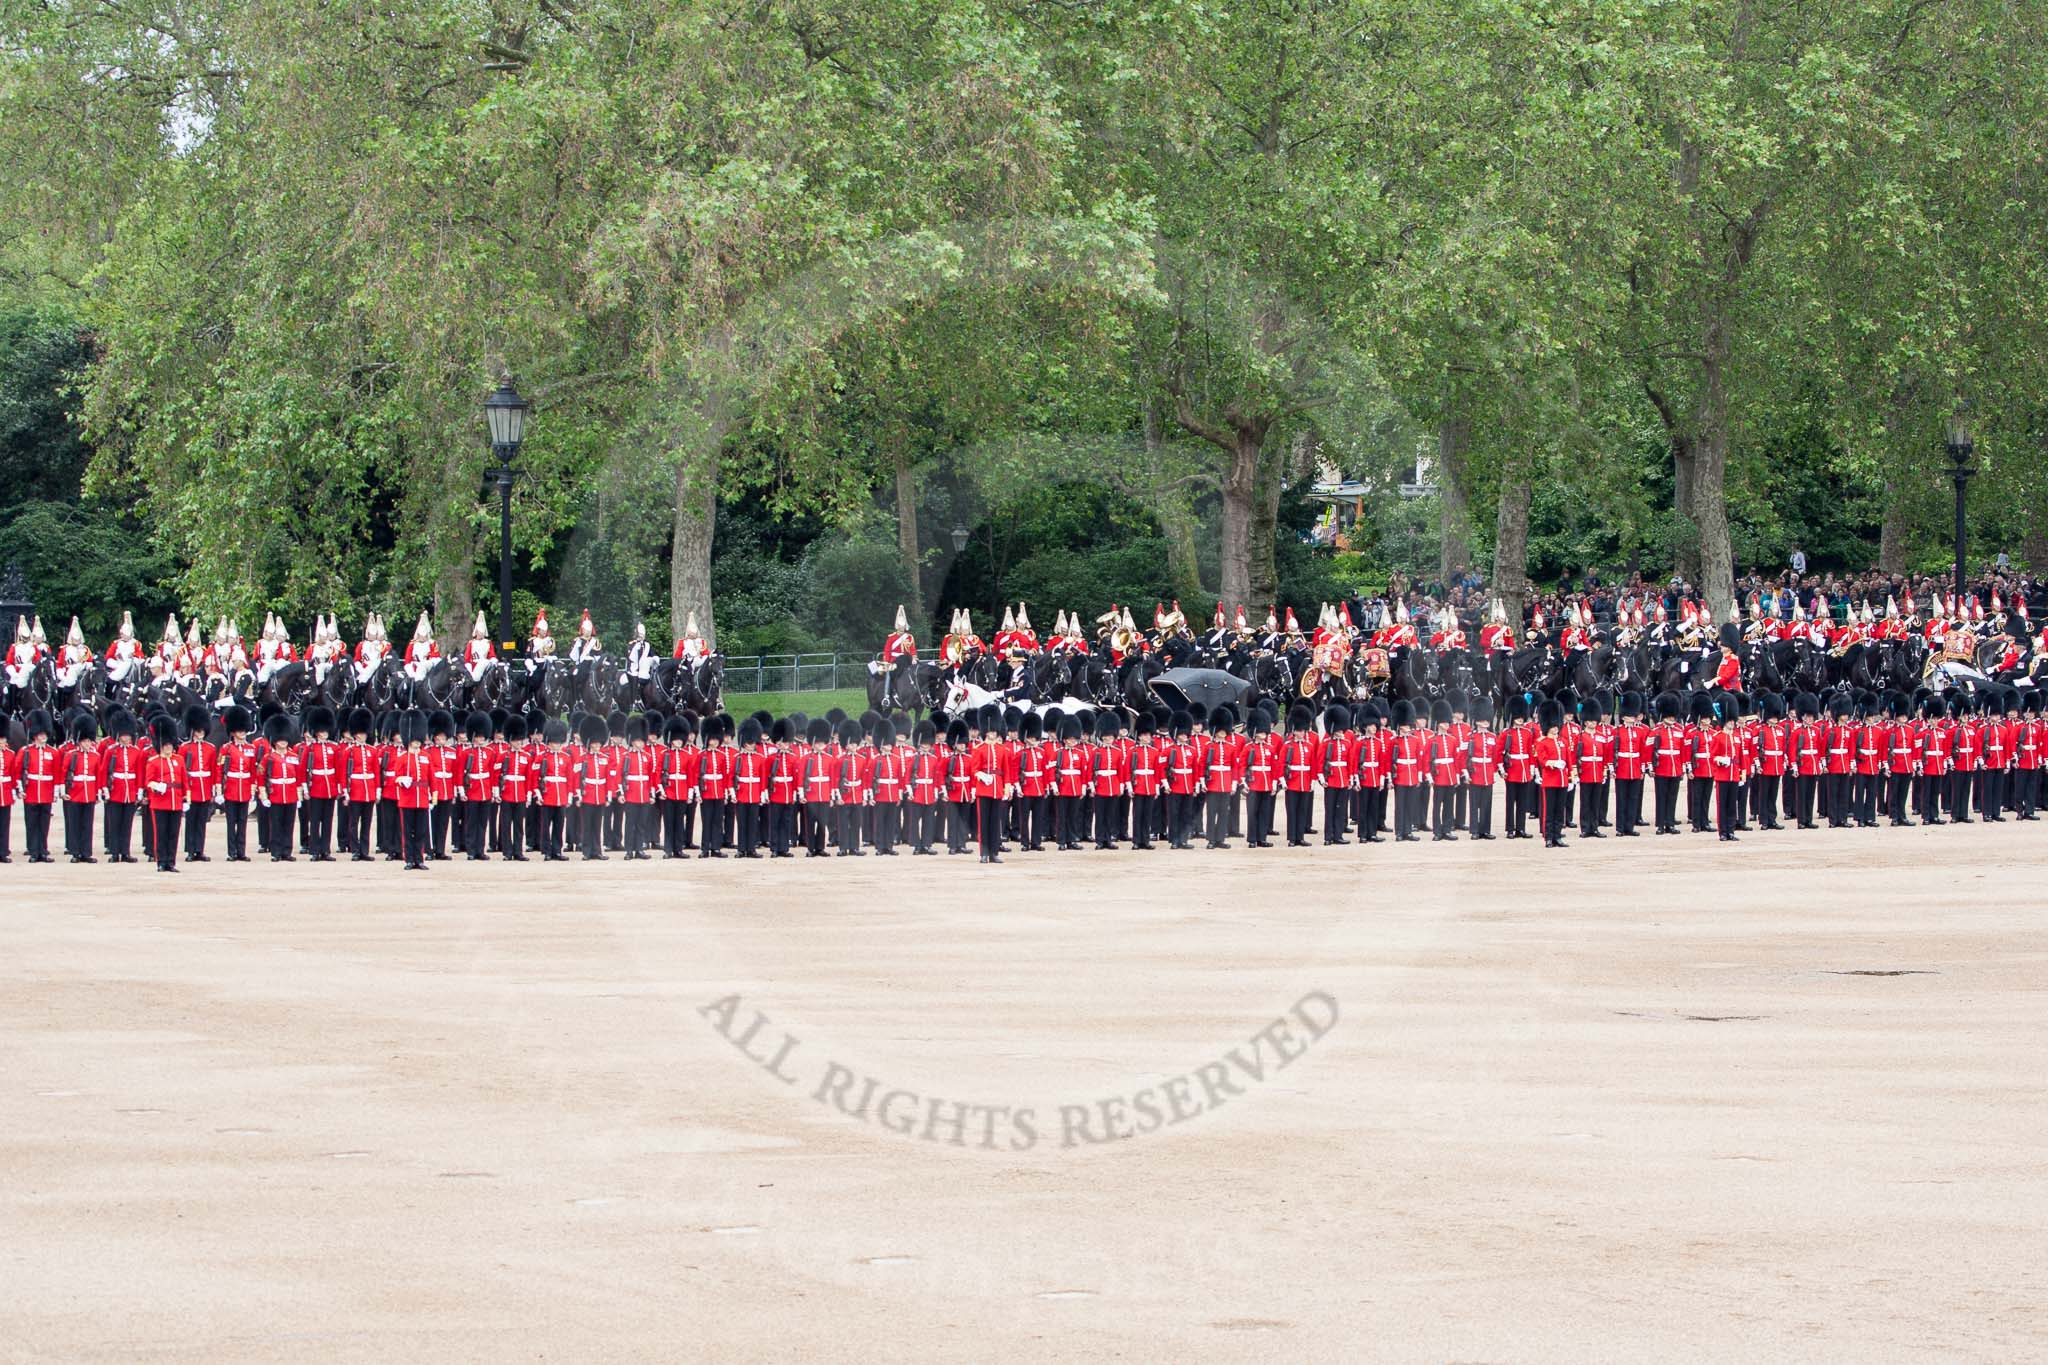 The Colonel's Review 2012: The Inspection of the Line continues behind No. 6 Guard towards the Souvereign's Escort, the Mounted Band of the Household Cavalry, and the King's Troop Royal Horse Artillery, all in position along the St James's Park side of Horse Guards Parade..
Horse Guards Parade, Westminster,
London SW1,

United Kingdom,
on 09 June 2012 at 11:02, image #186